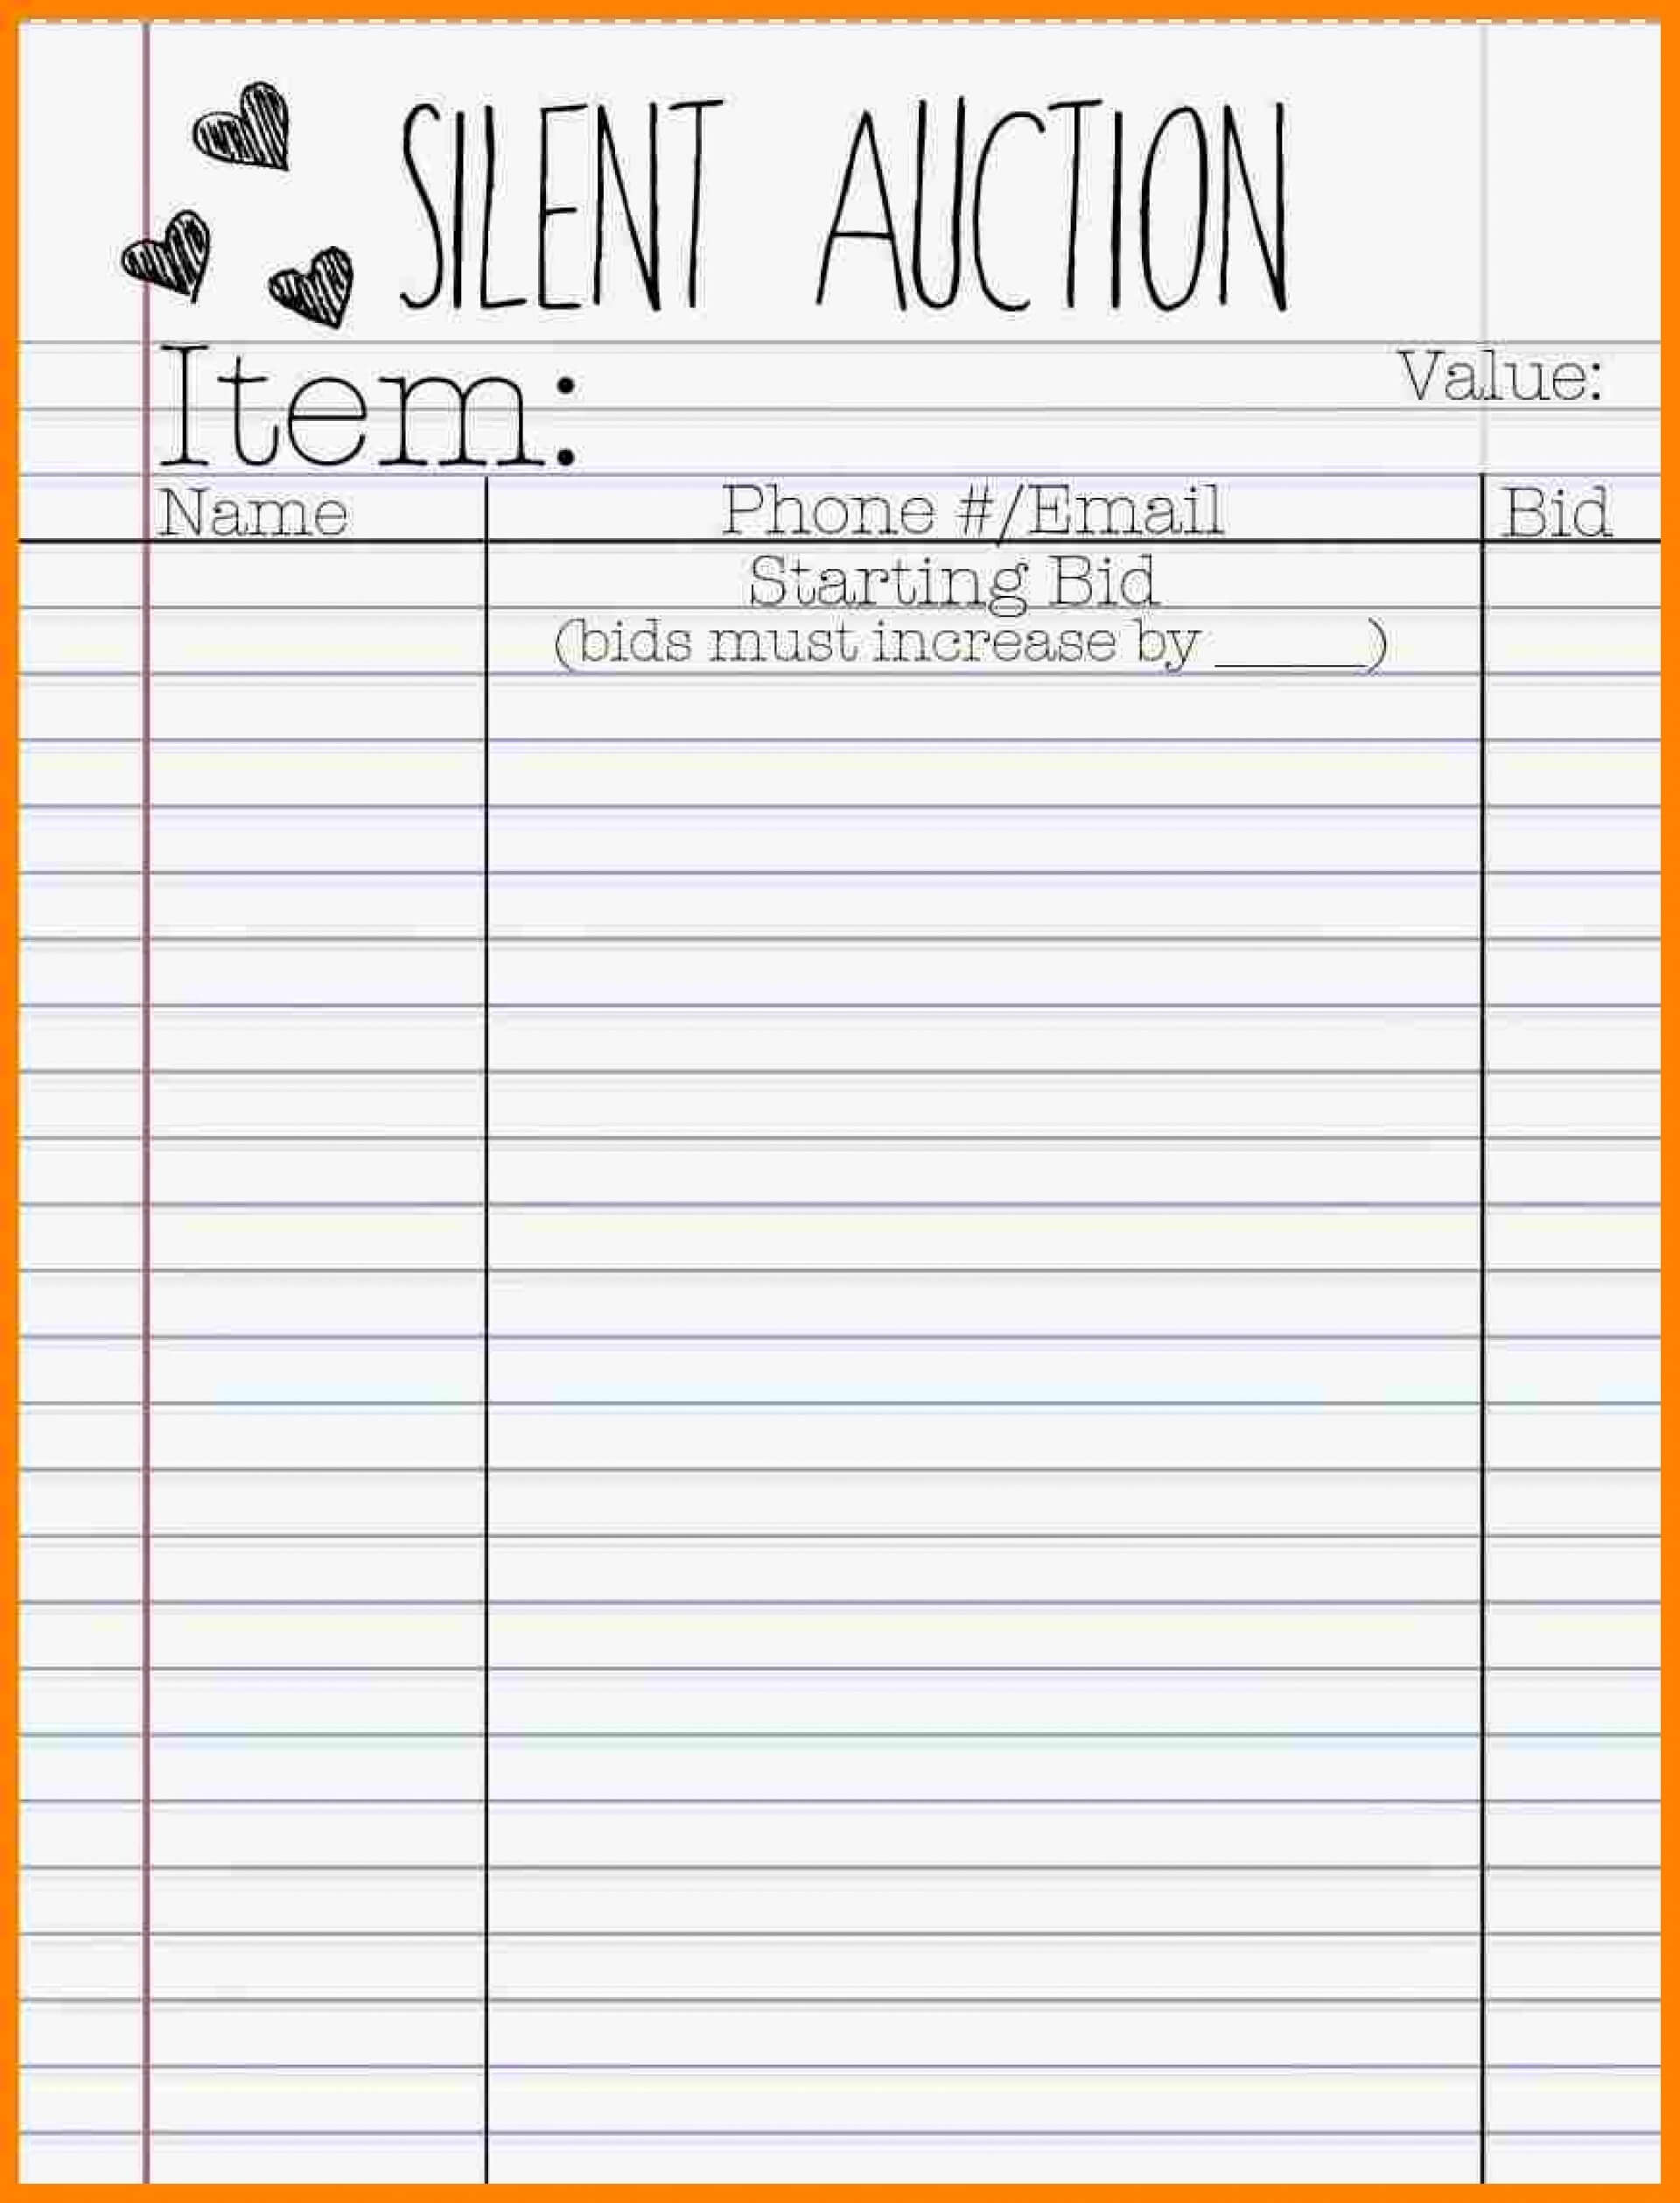 008 Template Ideas Silent Auction Bid Sheet Fearsome Word With Regard To Auction Bid Cards Template